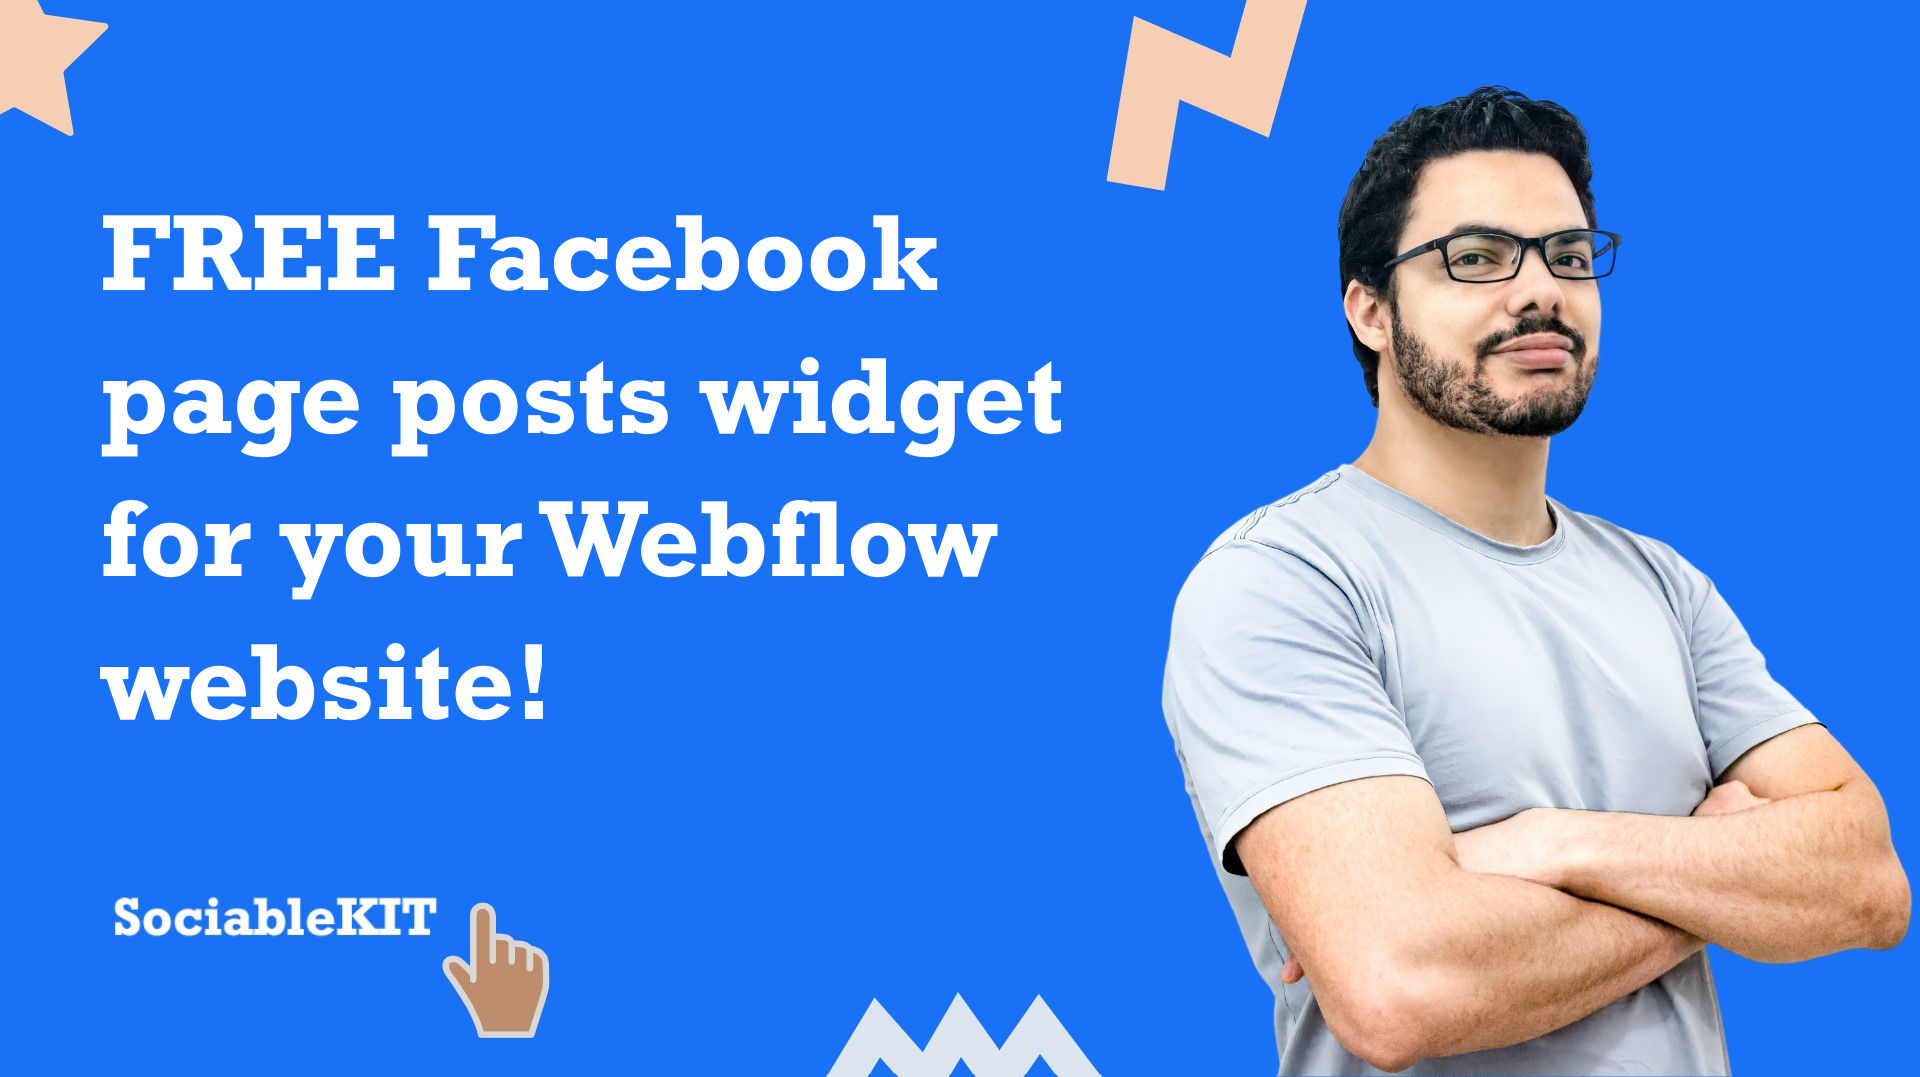 Free Facebook page posts widget for your Webflow website